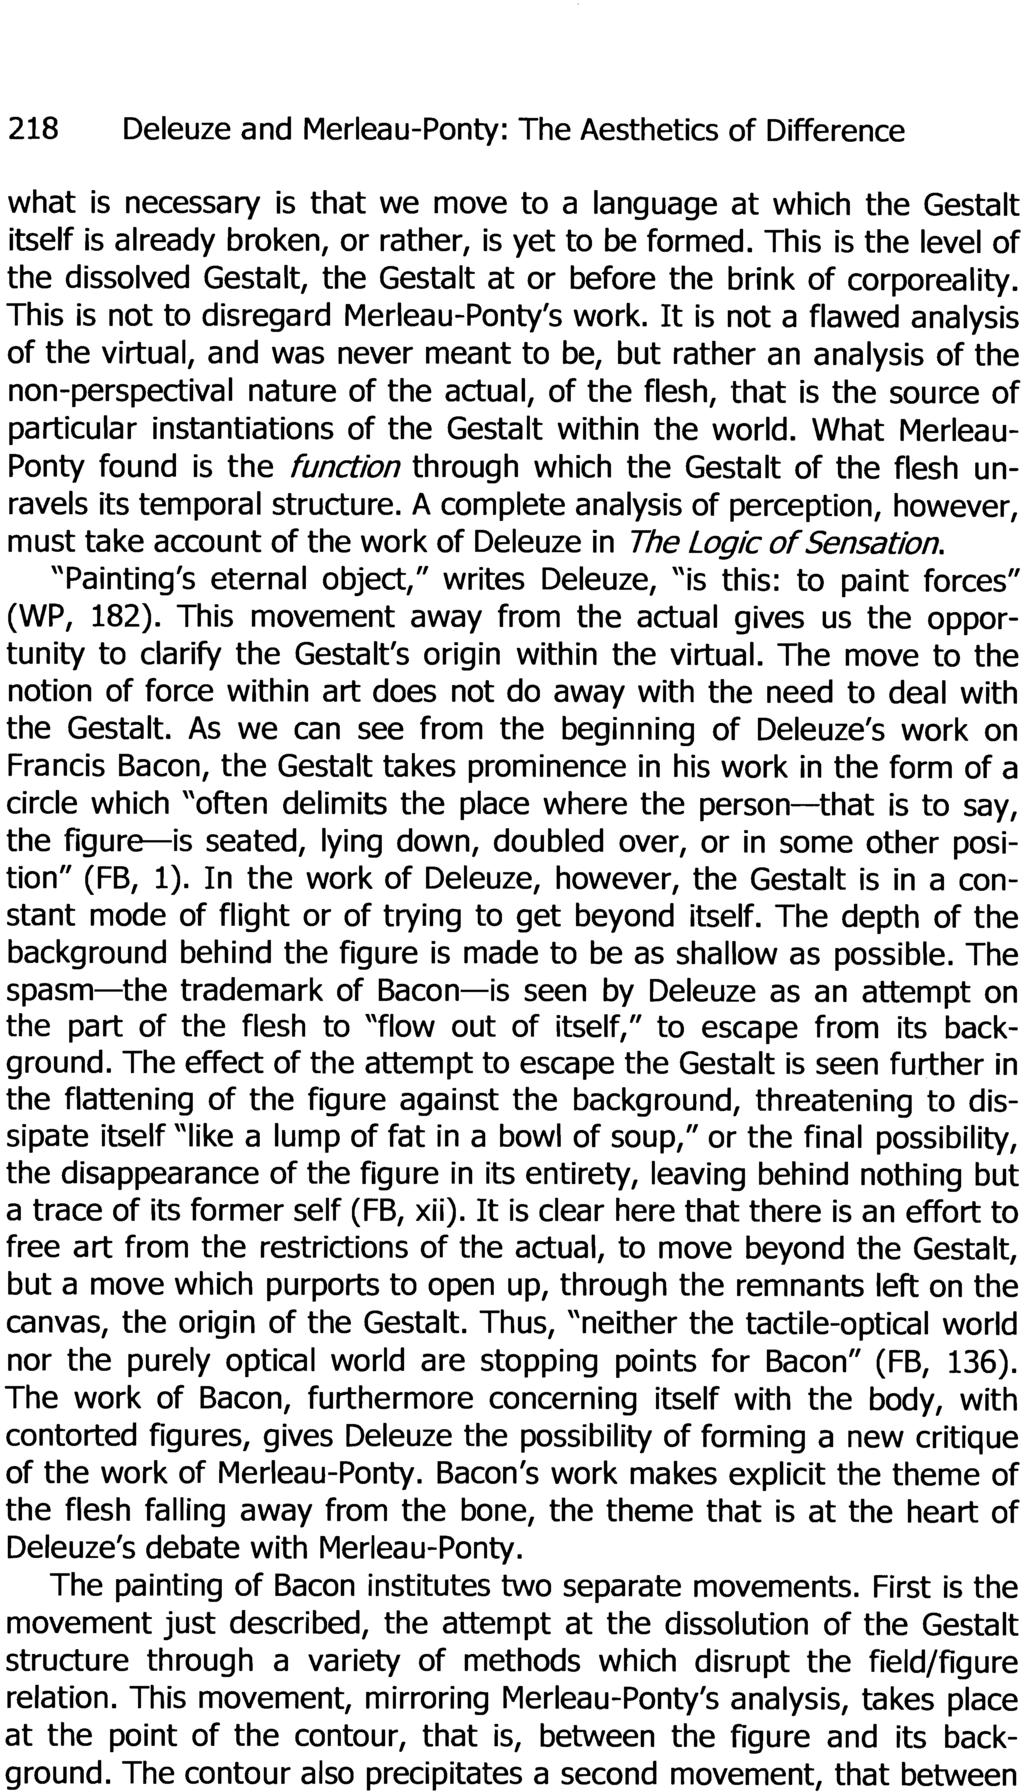 218 Deleuze and Merleau-Ponty: The Aesthetics of Difference what is necessary is that we move to a language at which the Gestalt itself is already broken, or rather, is yet to be formed.